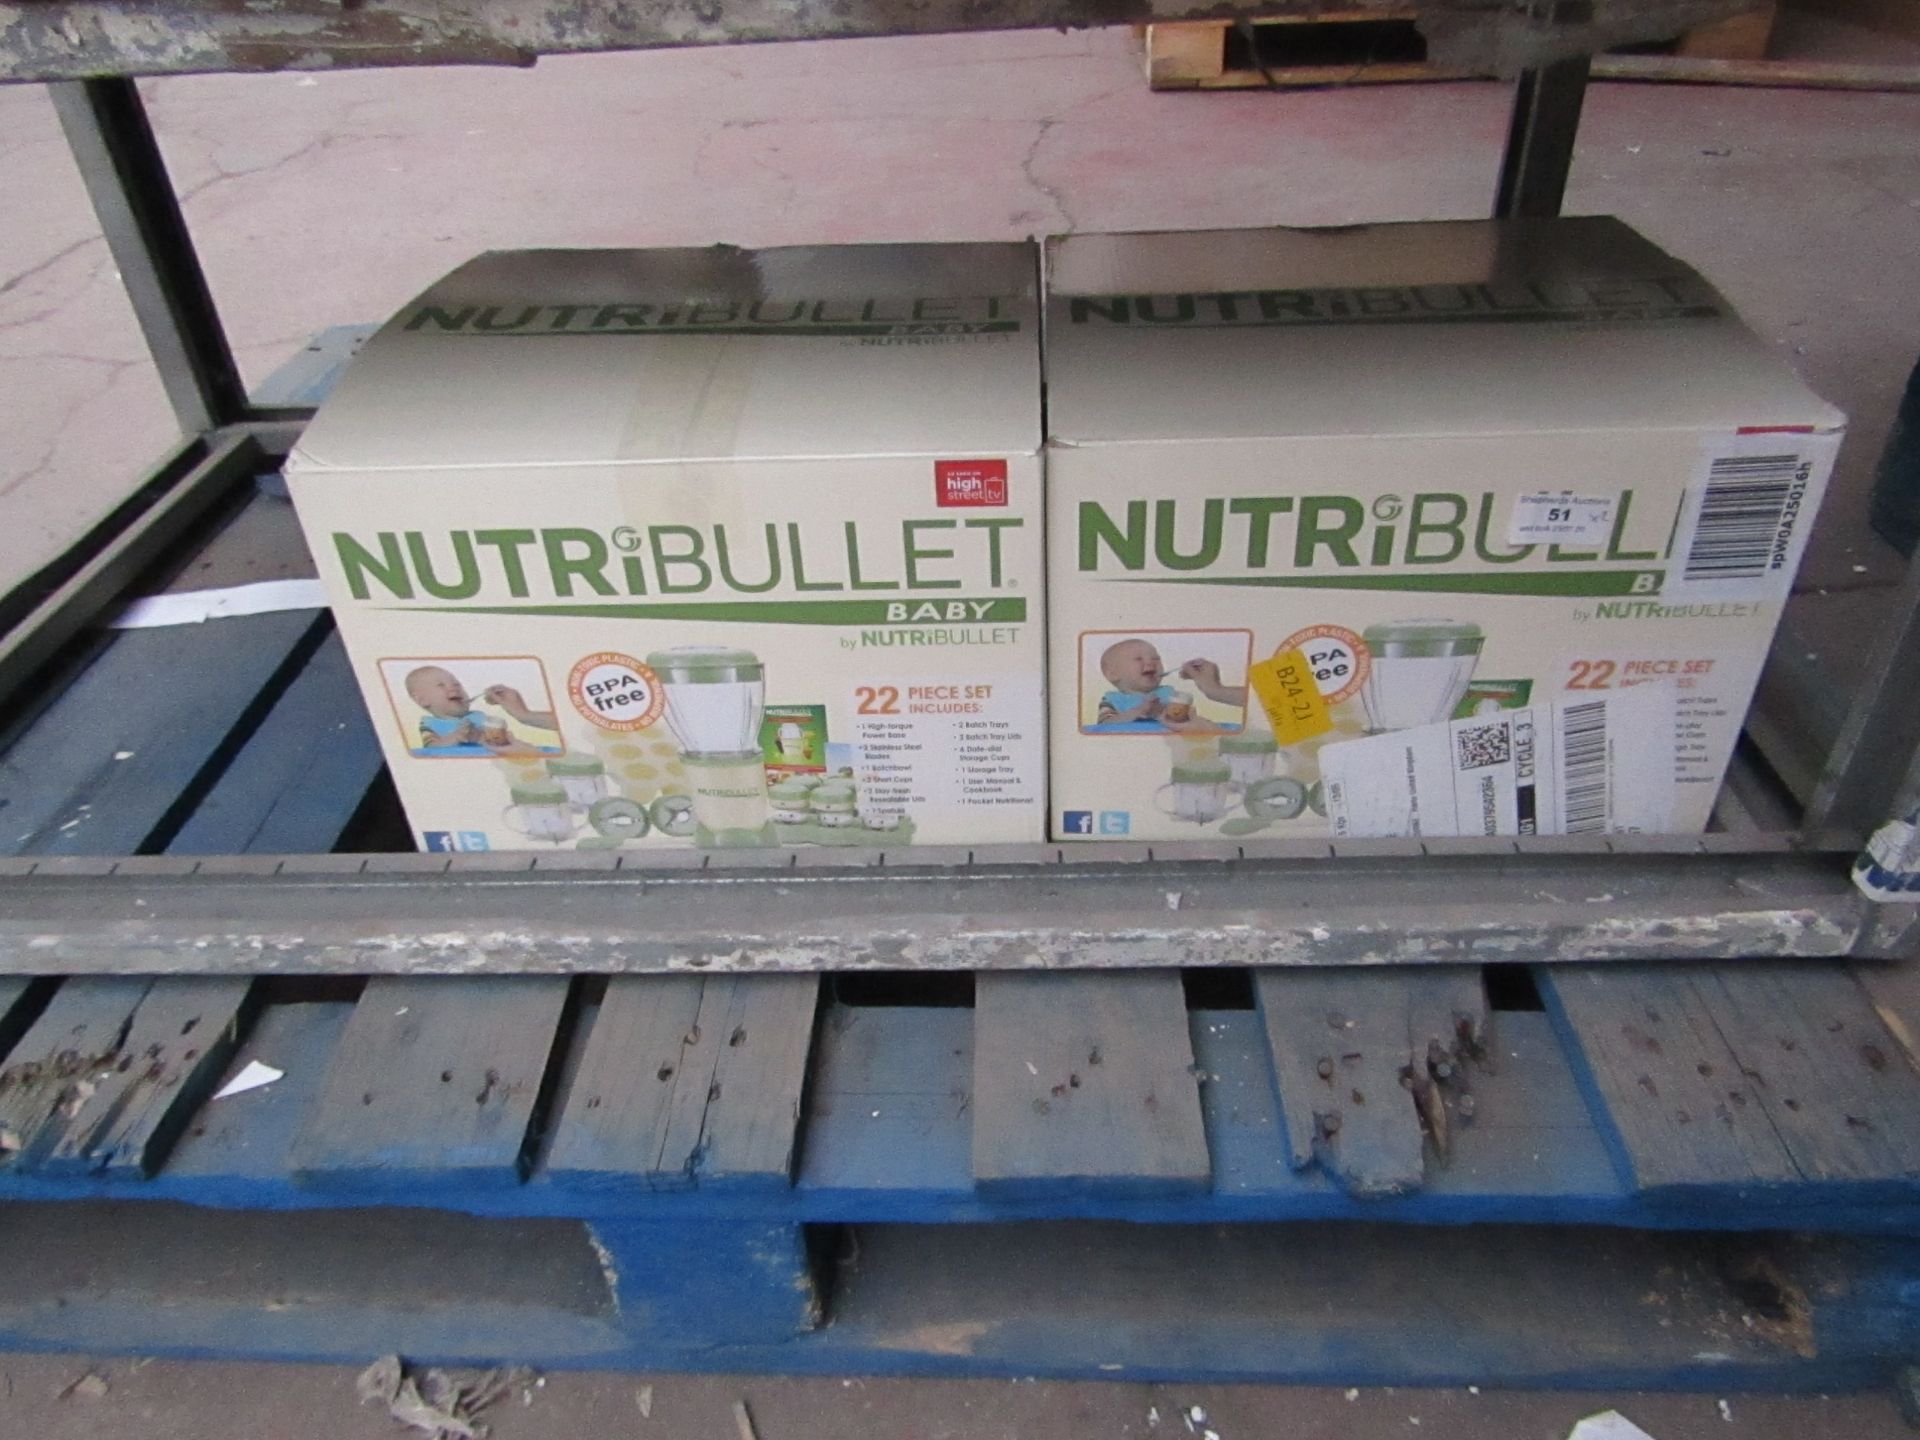 2 X NUTRIBULLET BABY 22 PIECE SET UNCHECKED AND BOXED